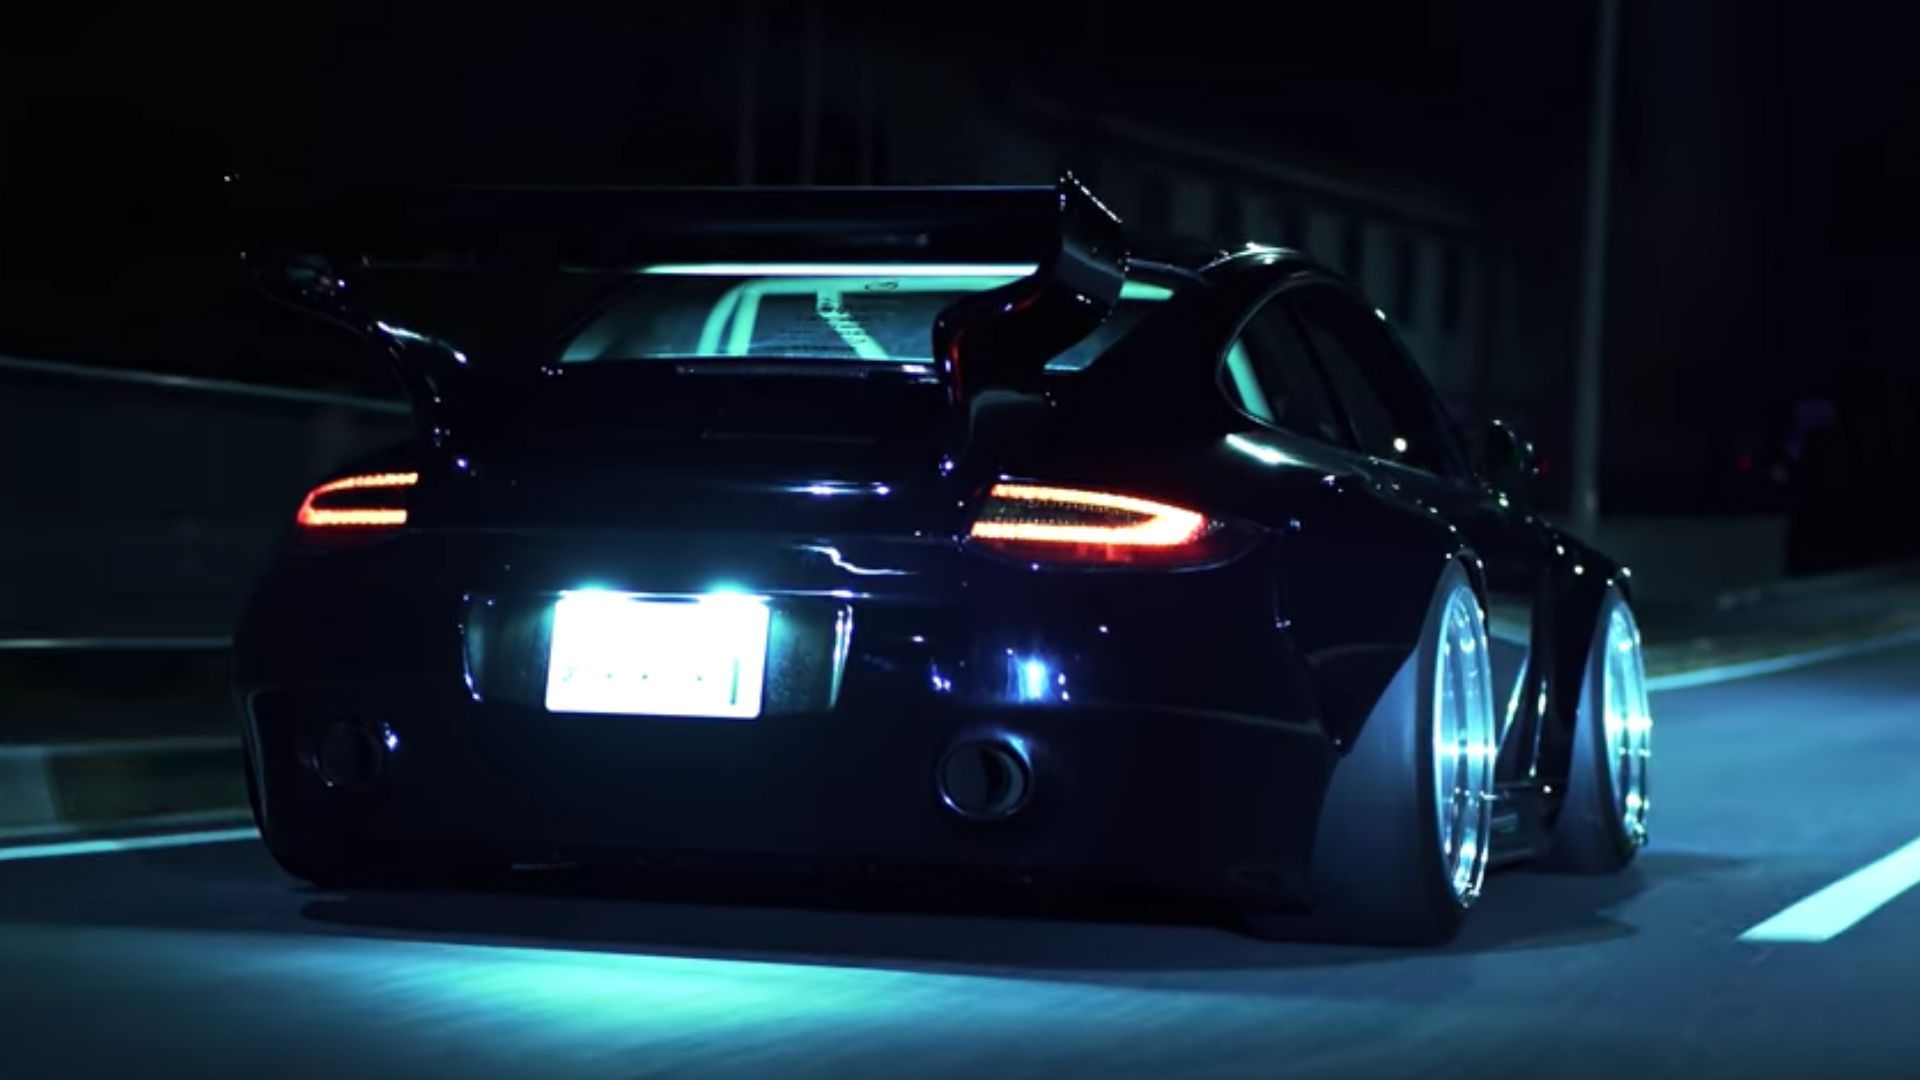 Slant Nose Widebody Porsche 997 Is Absolutely Wicked 